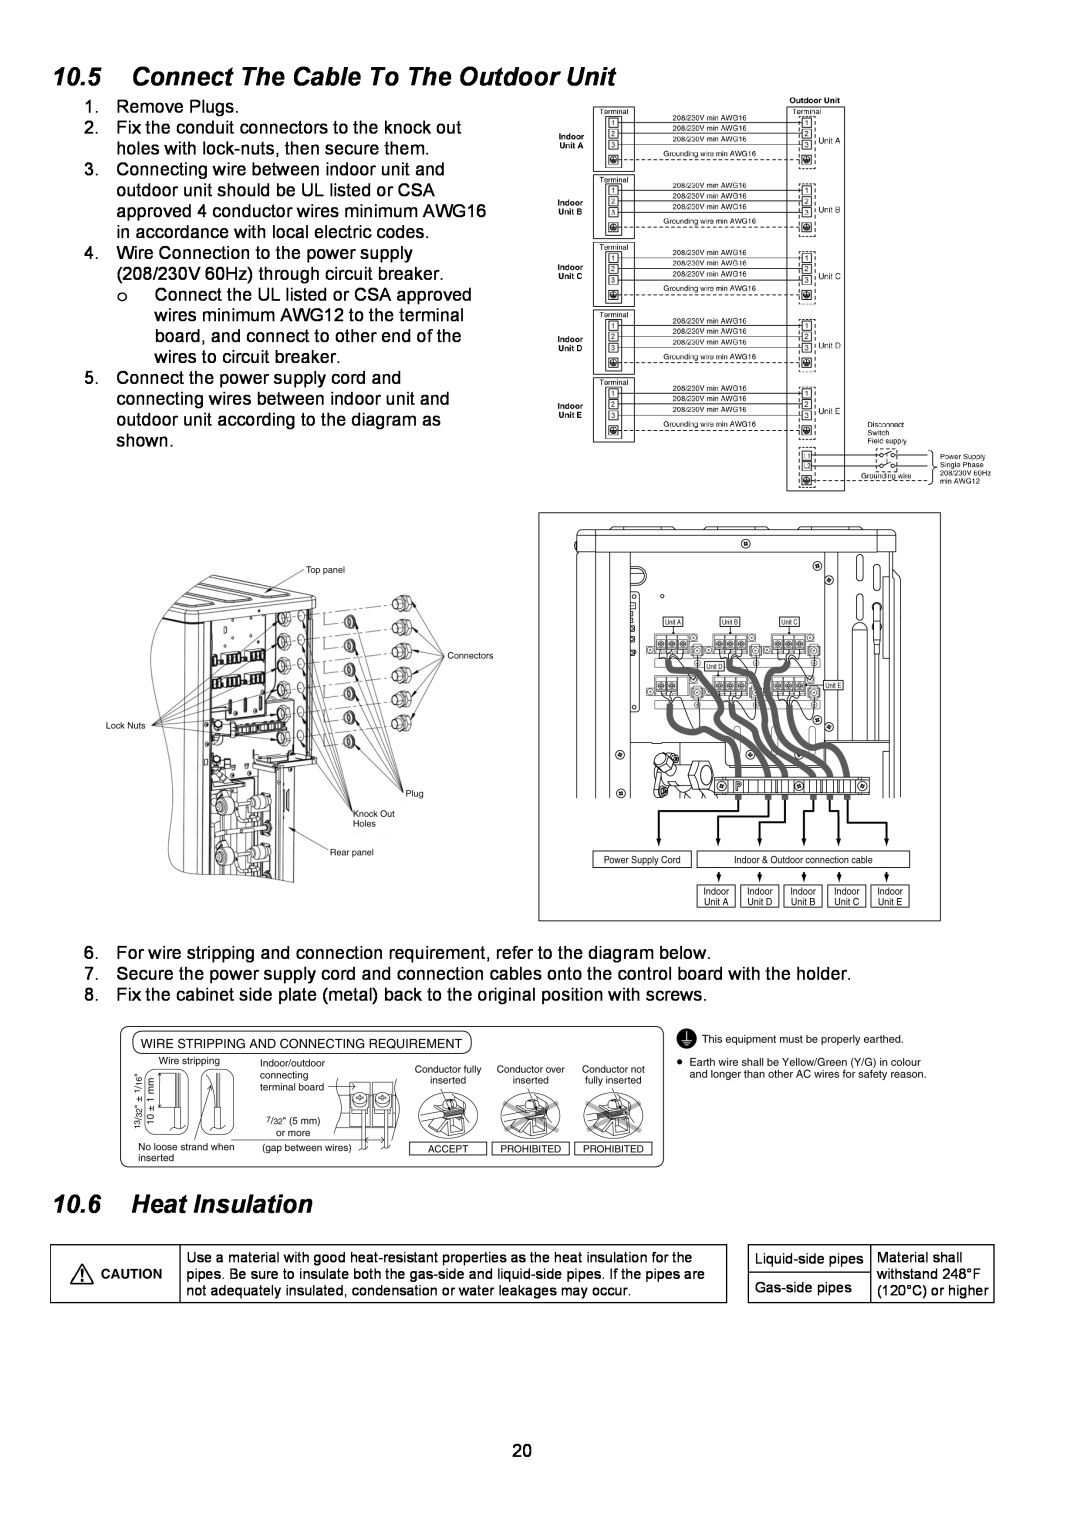 Panasonic CU-5E36QBU service manual 10.5Connect The Cable To The Outdoor Unit, 10.6Heat Insulation 